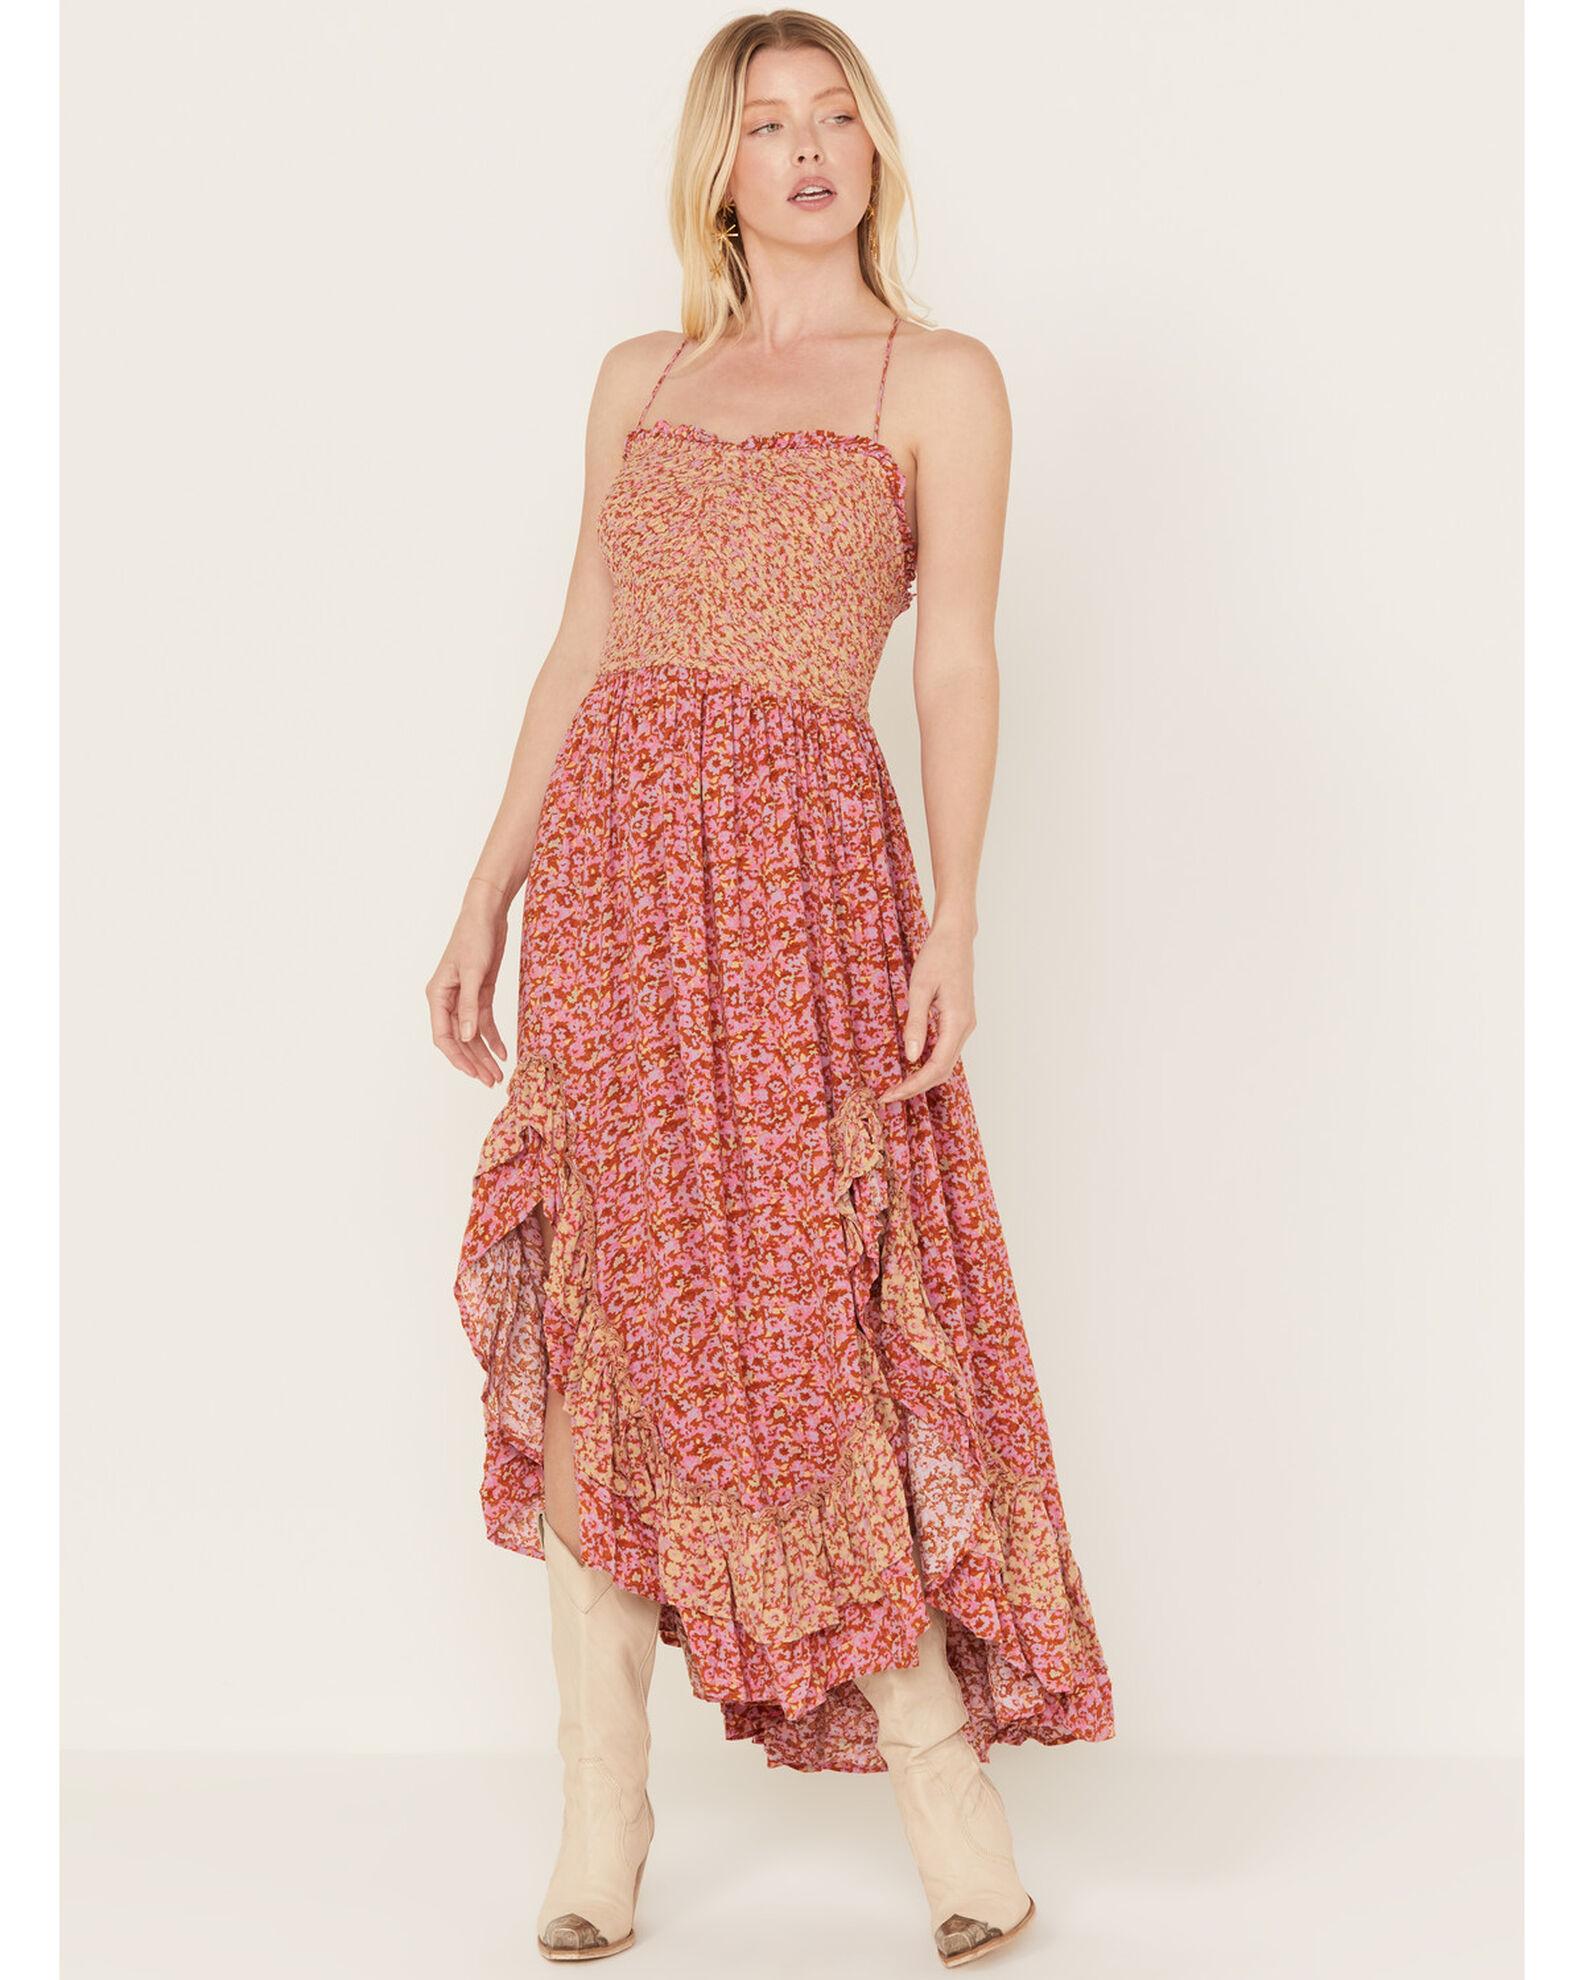 Product Name: Free People Women's One I Love Floral Maxi Dress